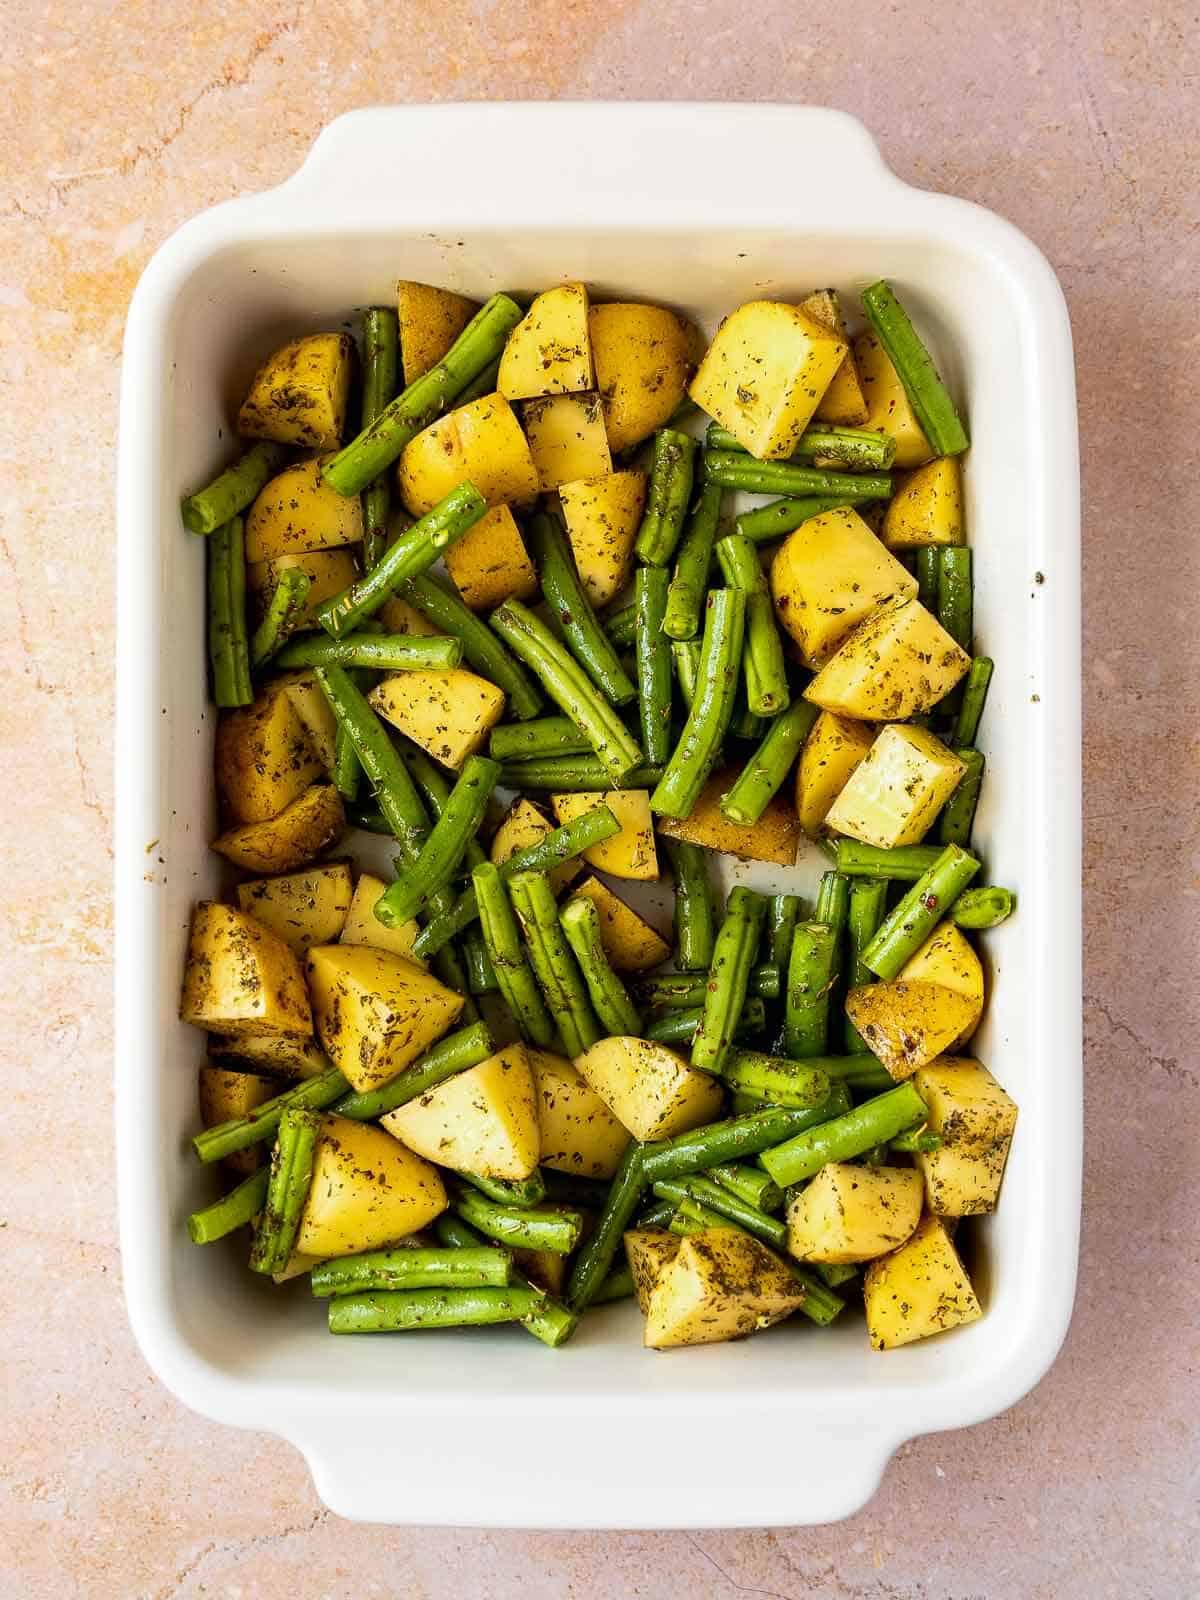 Tip the potatoes and green beans into a large casserole dish.